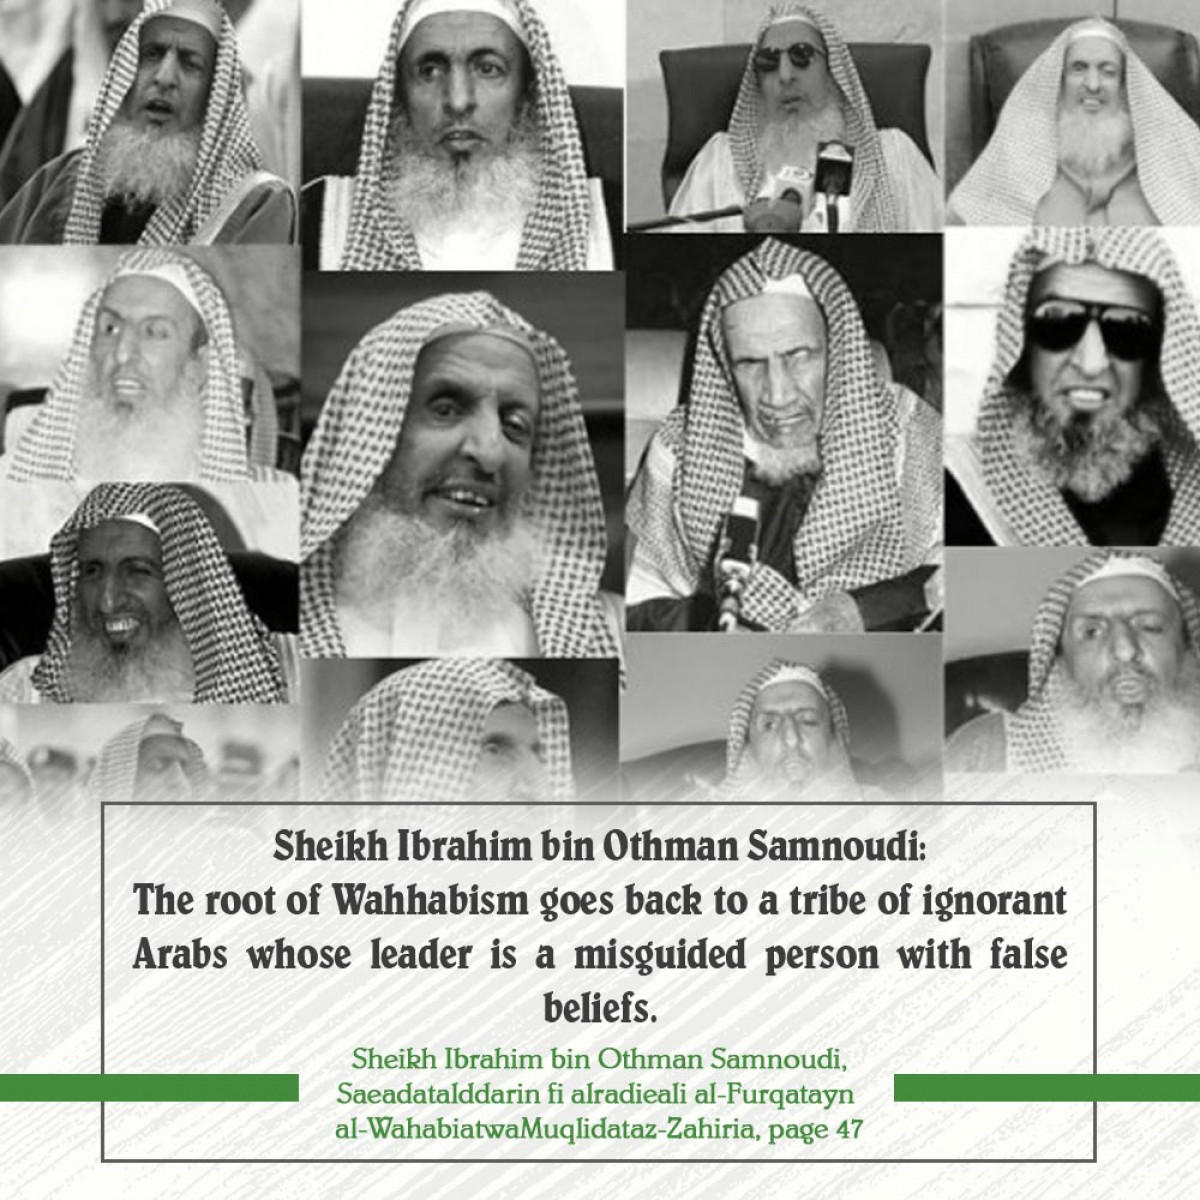 The root of Wahhabism goes back to a tribe of ignorant Arabs